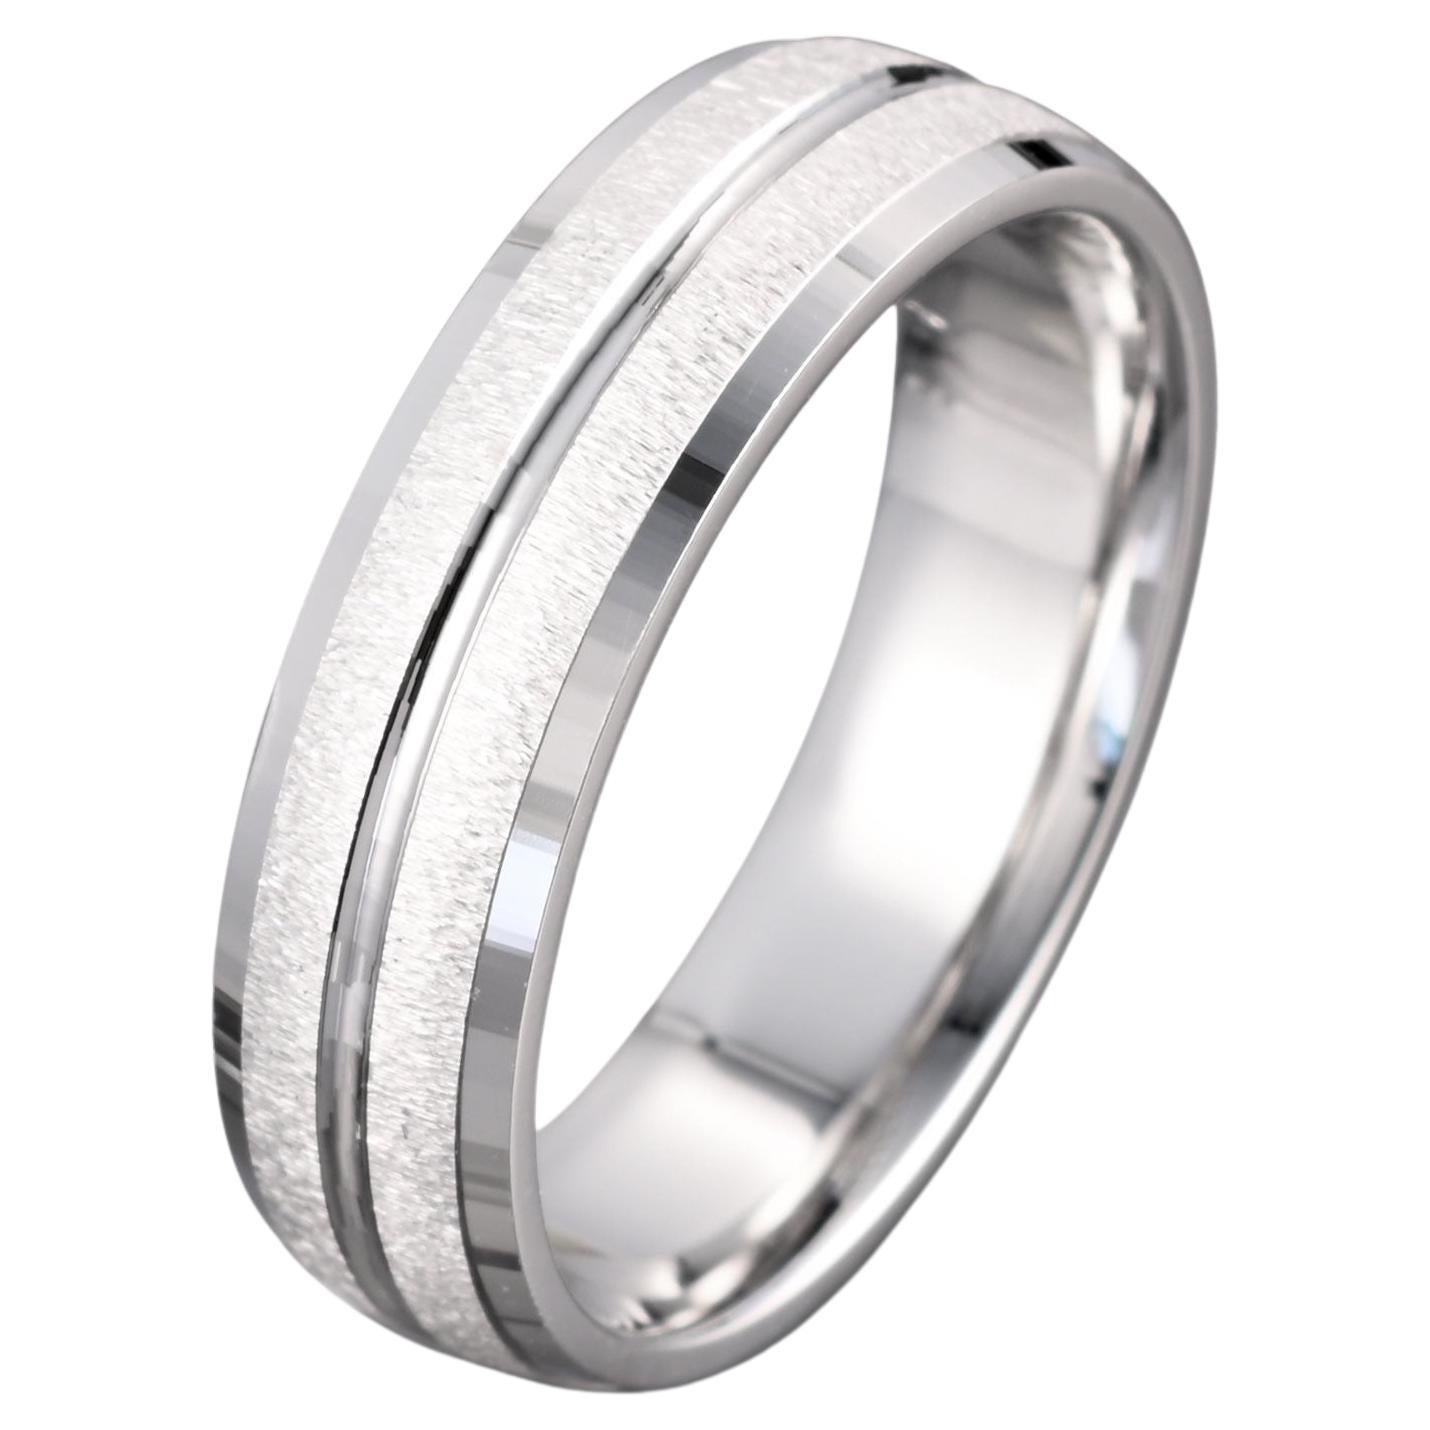 6mm Wedding Band Ring Stainless Steel Half Round Polished Grooved Traditional. 